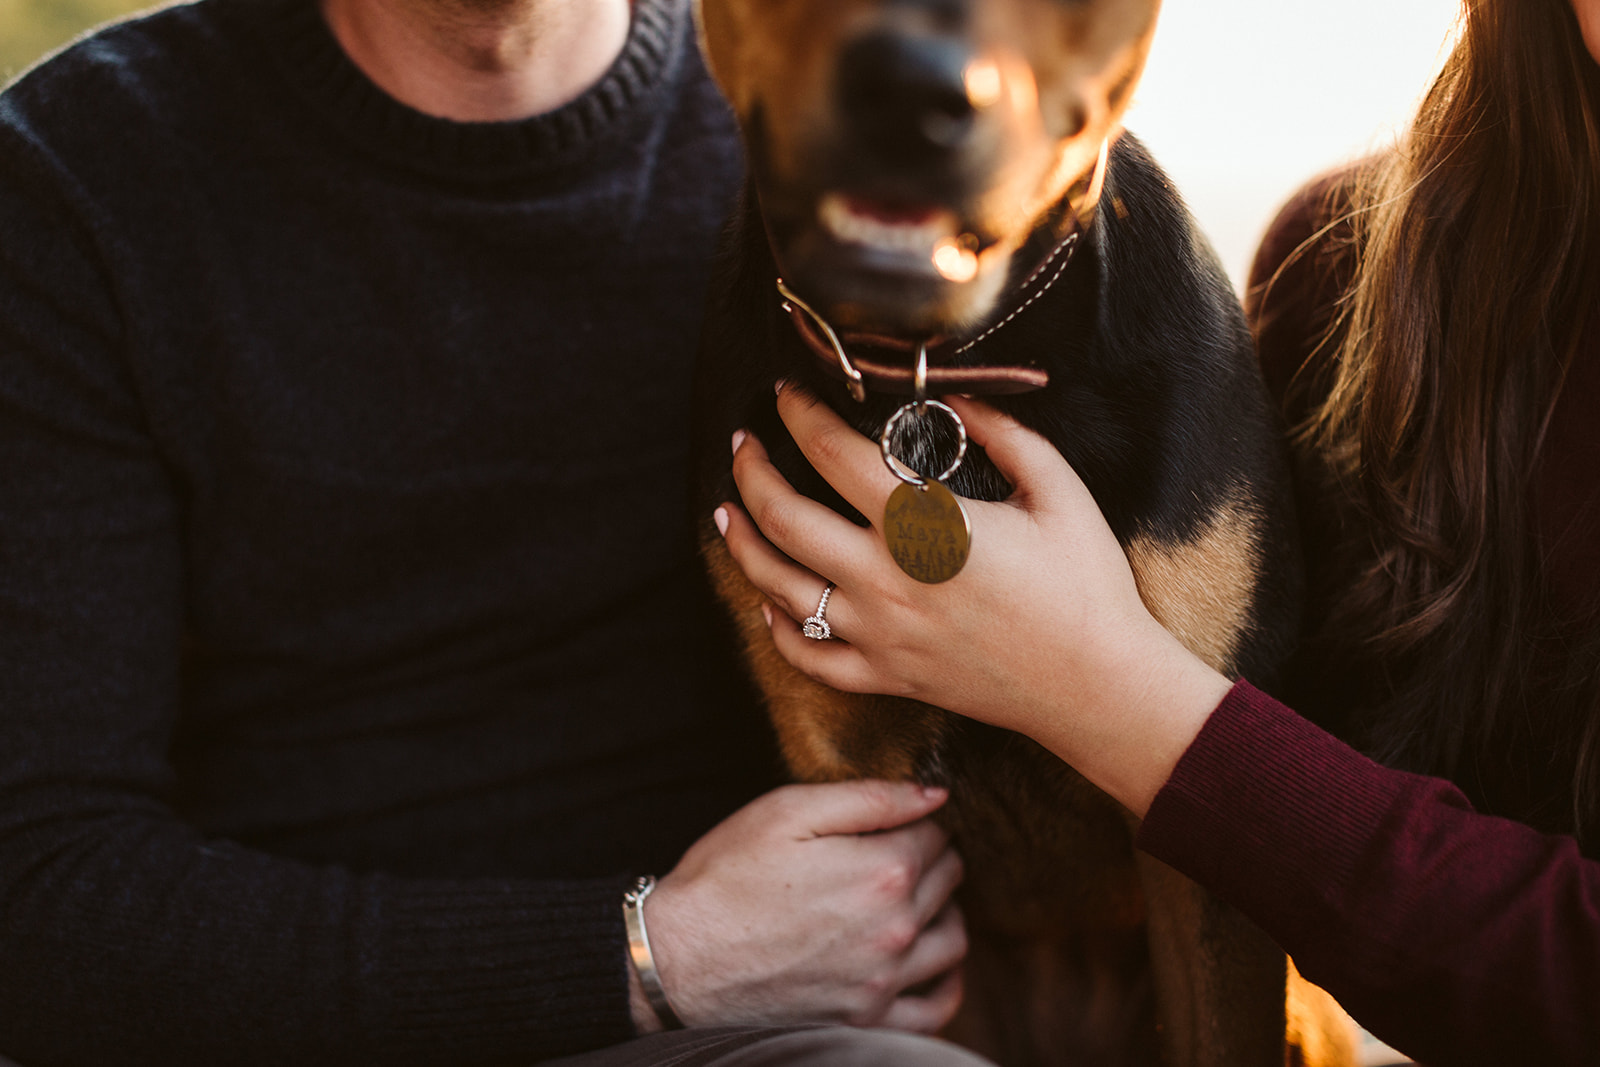 A close-up shot of a man and woman hugging their black and tan dog. You can see the woman's engagement ring.